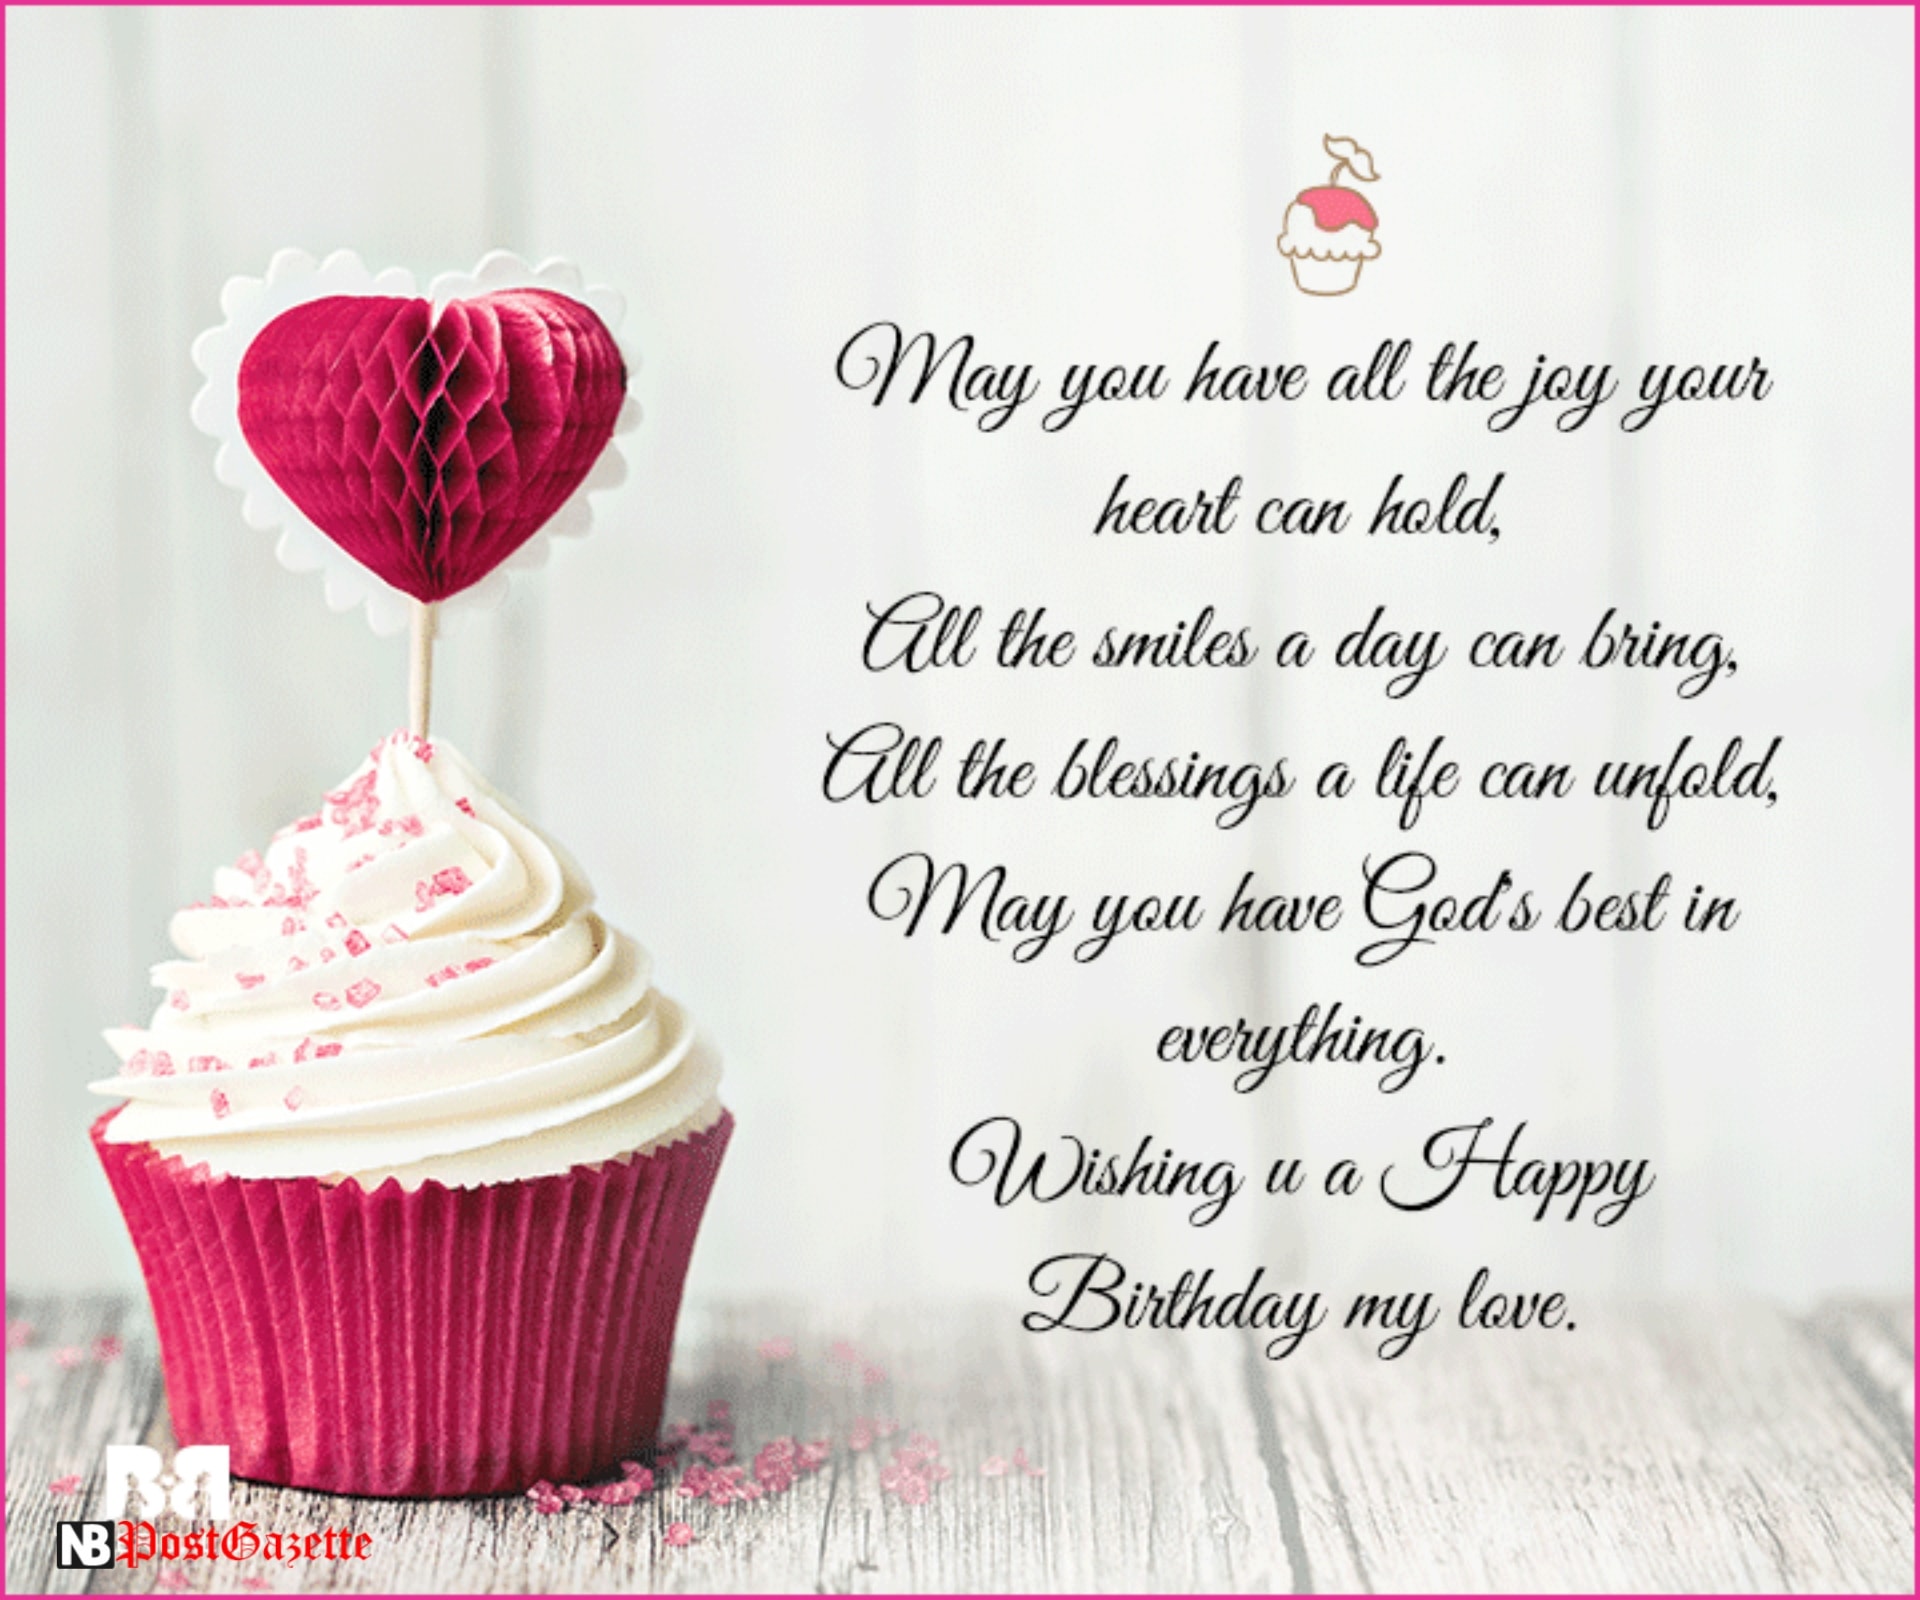 Top Best Happy Birthday Wishes, SMS, Quotes